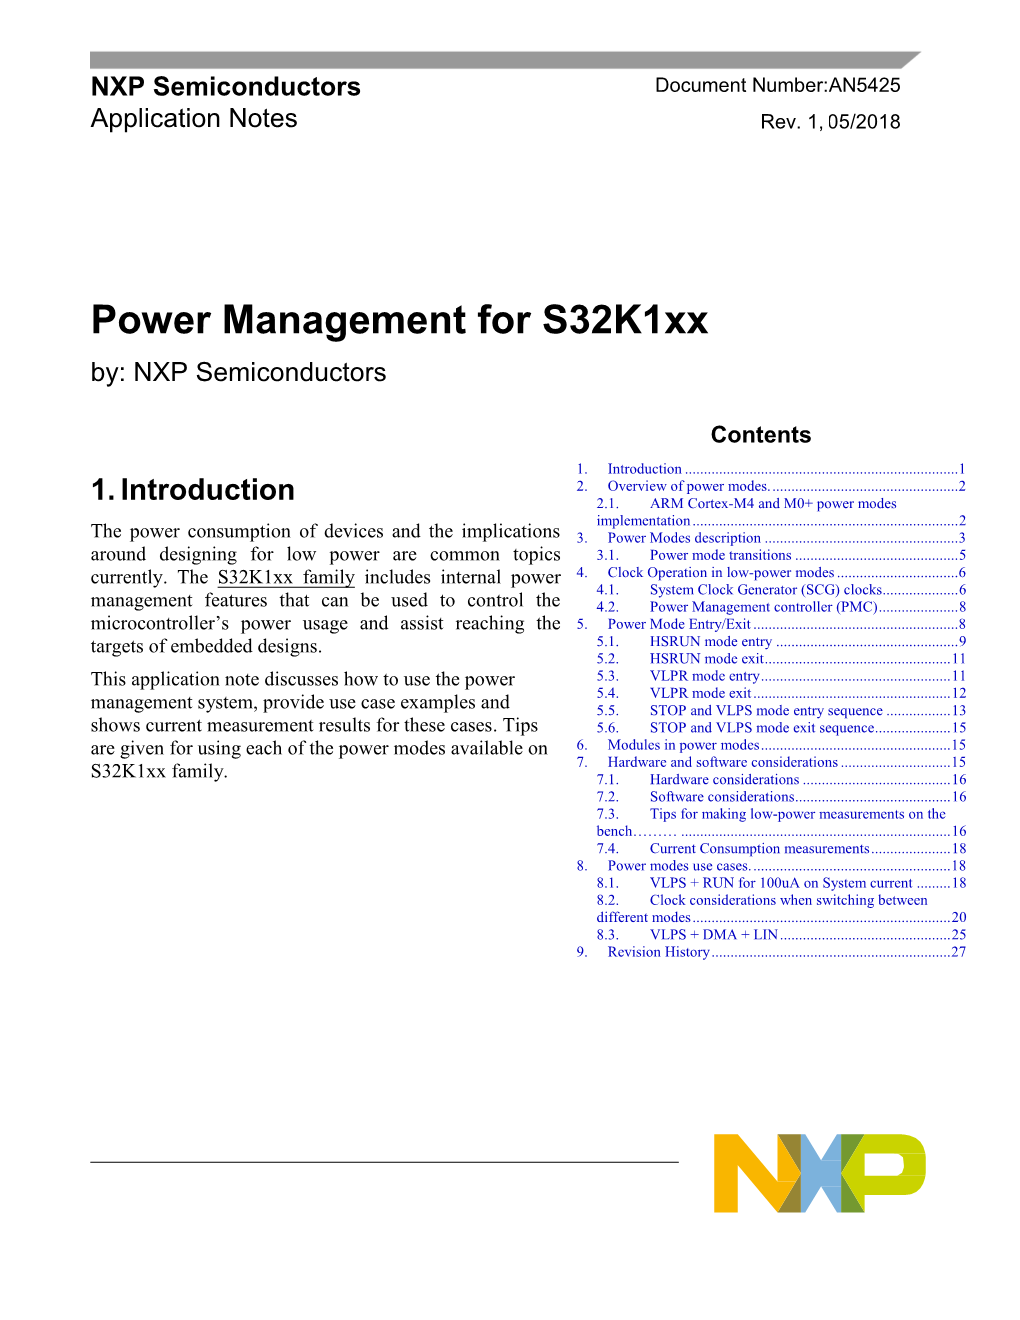 AN5425: Power Management for S32k1xx – Application Note